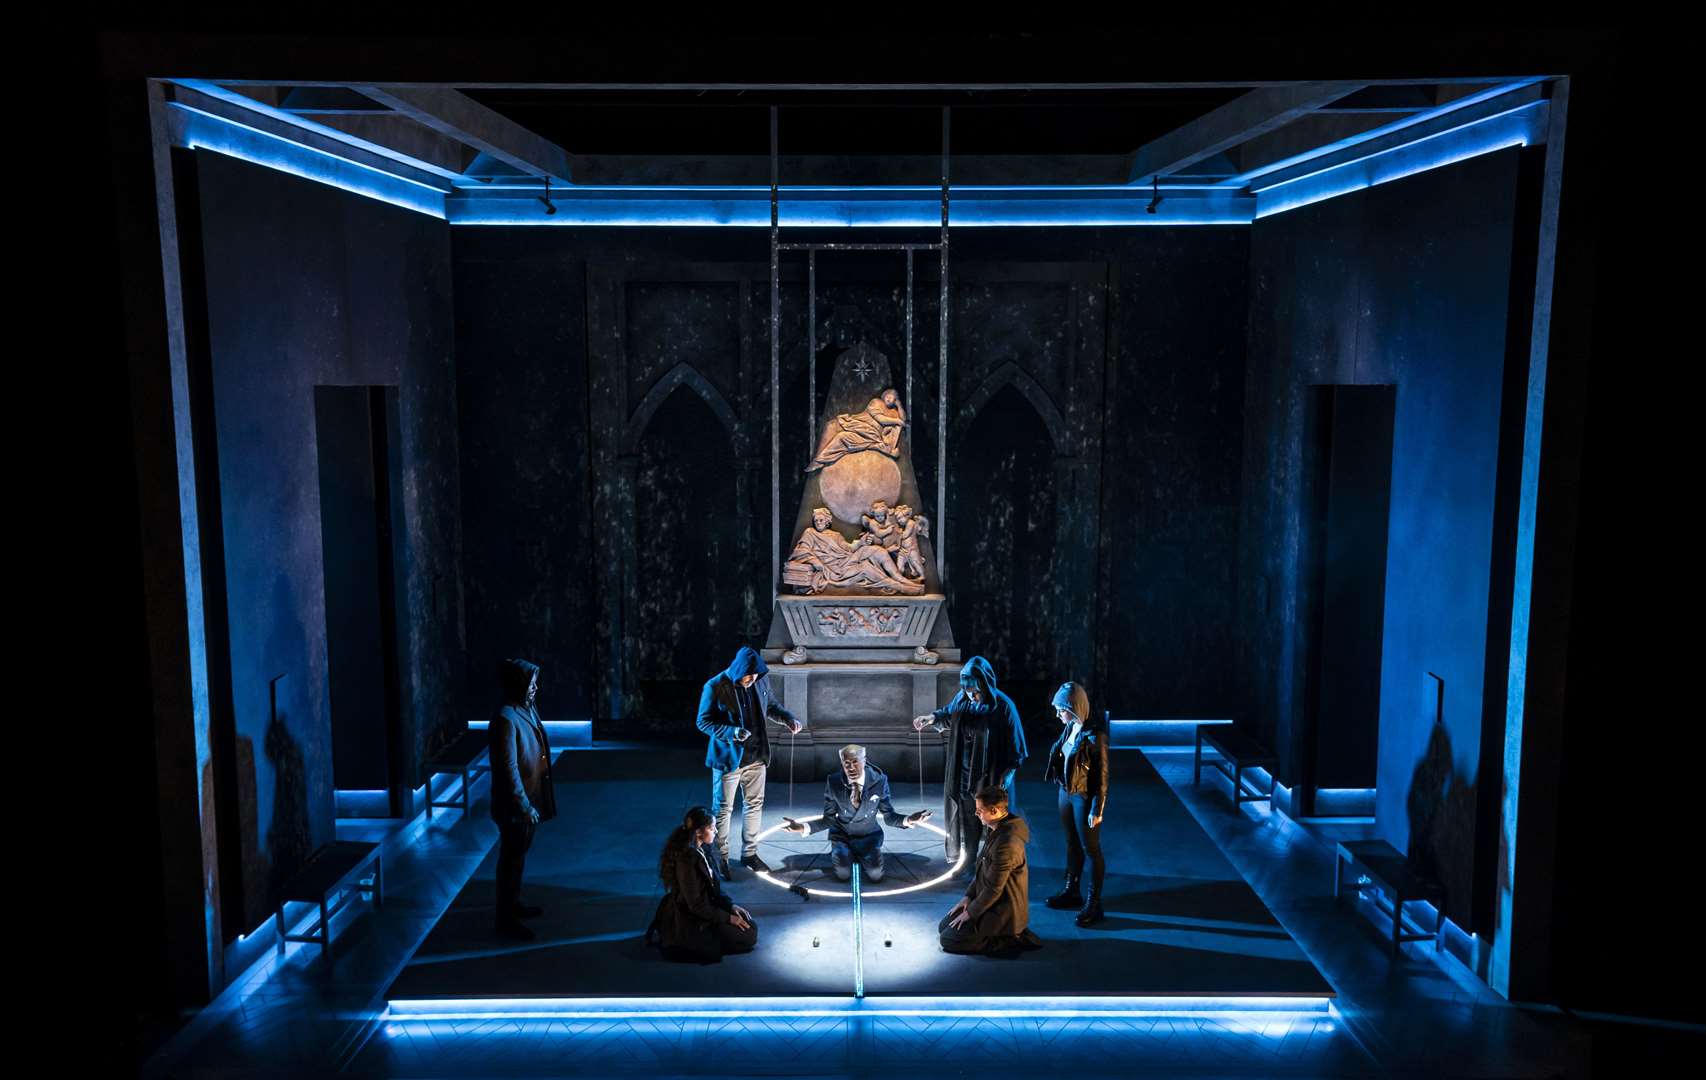 The Da Vinci Code will be coming to Aberdeen this summer. Credit: Johan Persson